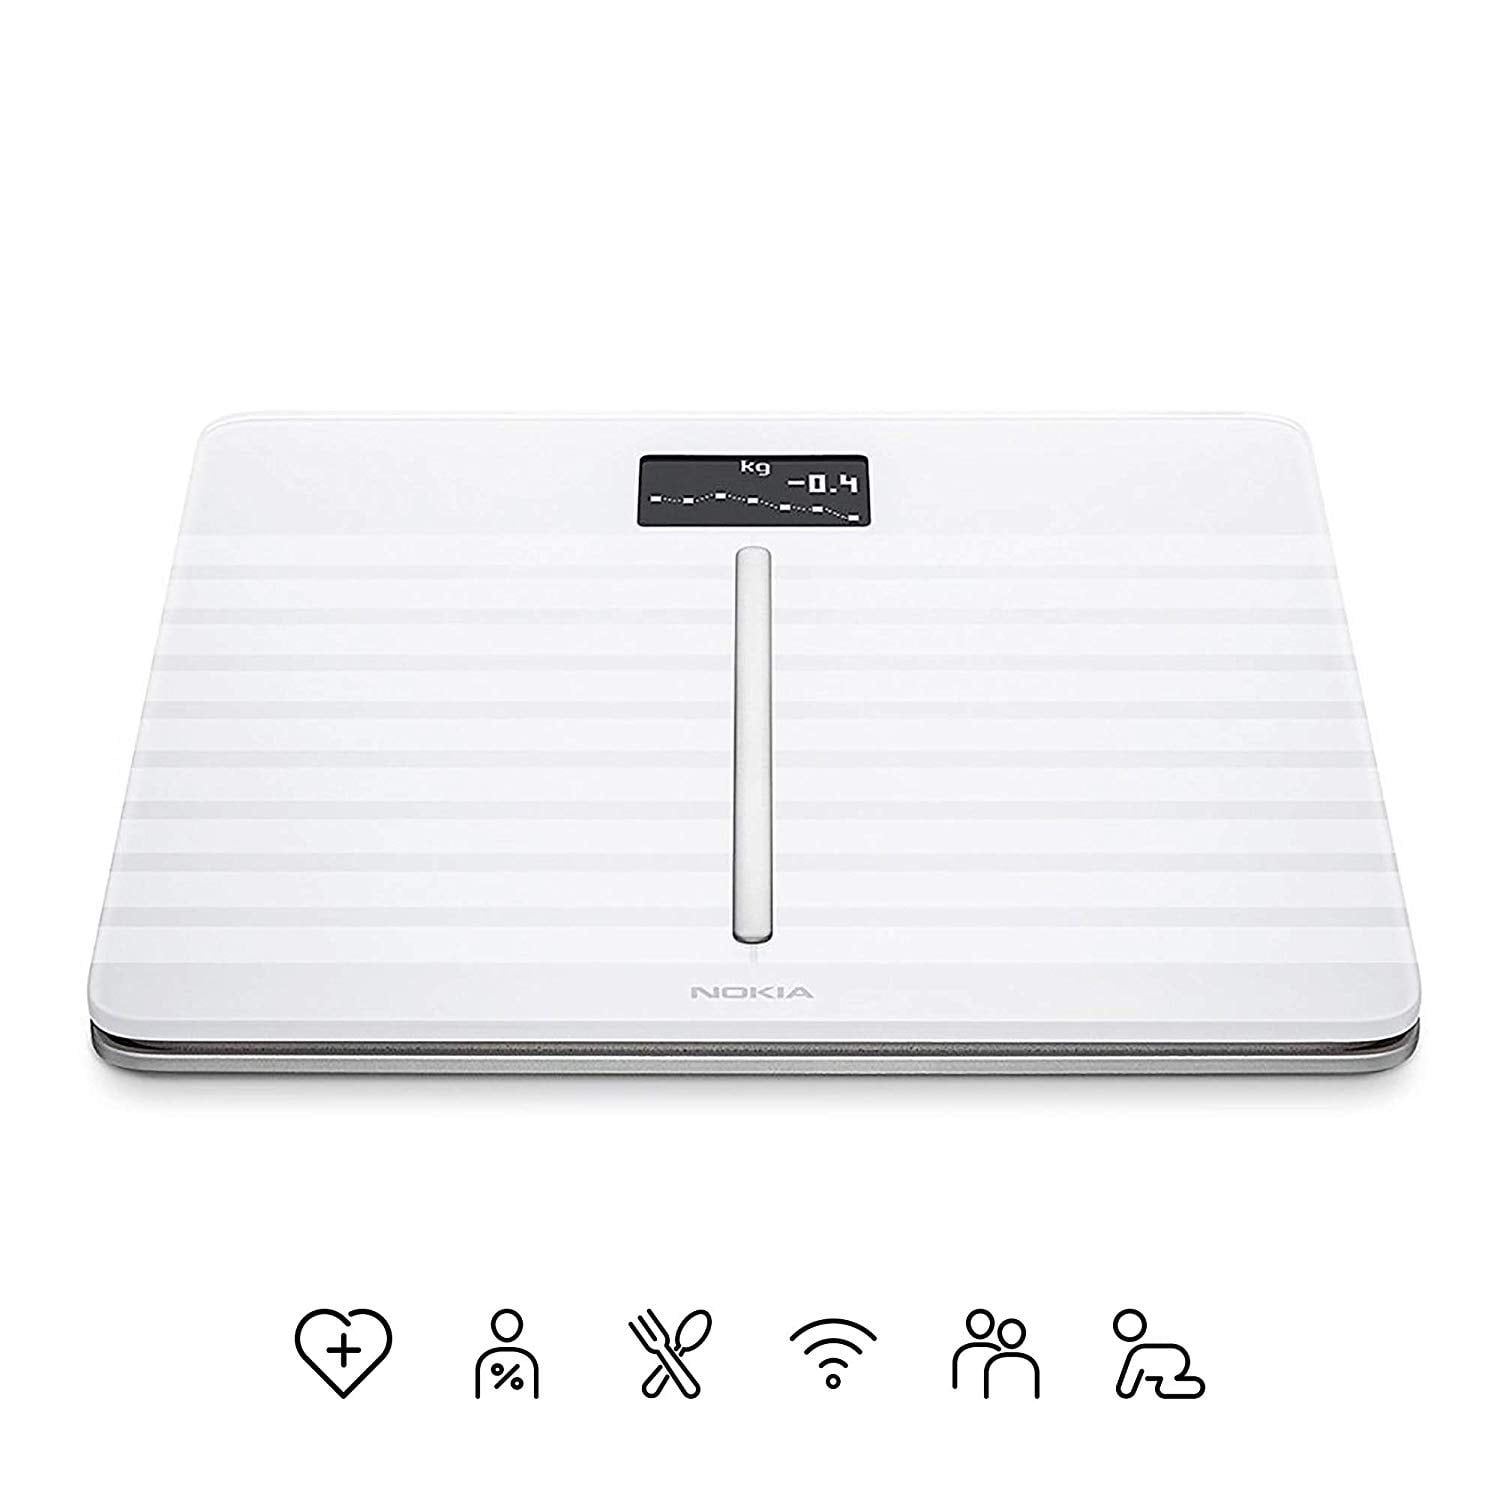 Withings Body Cardio (White) Body composition smart scale with heart rate  monitor at Crutchfield